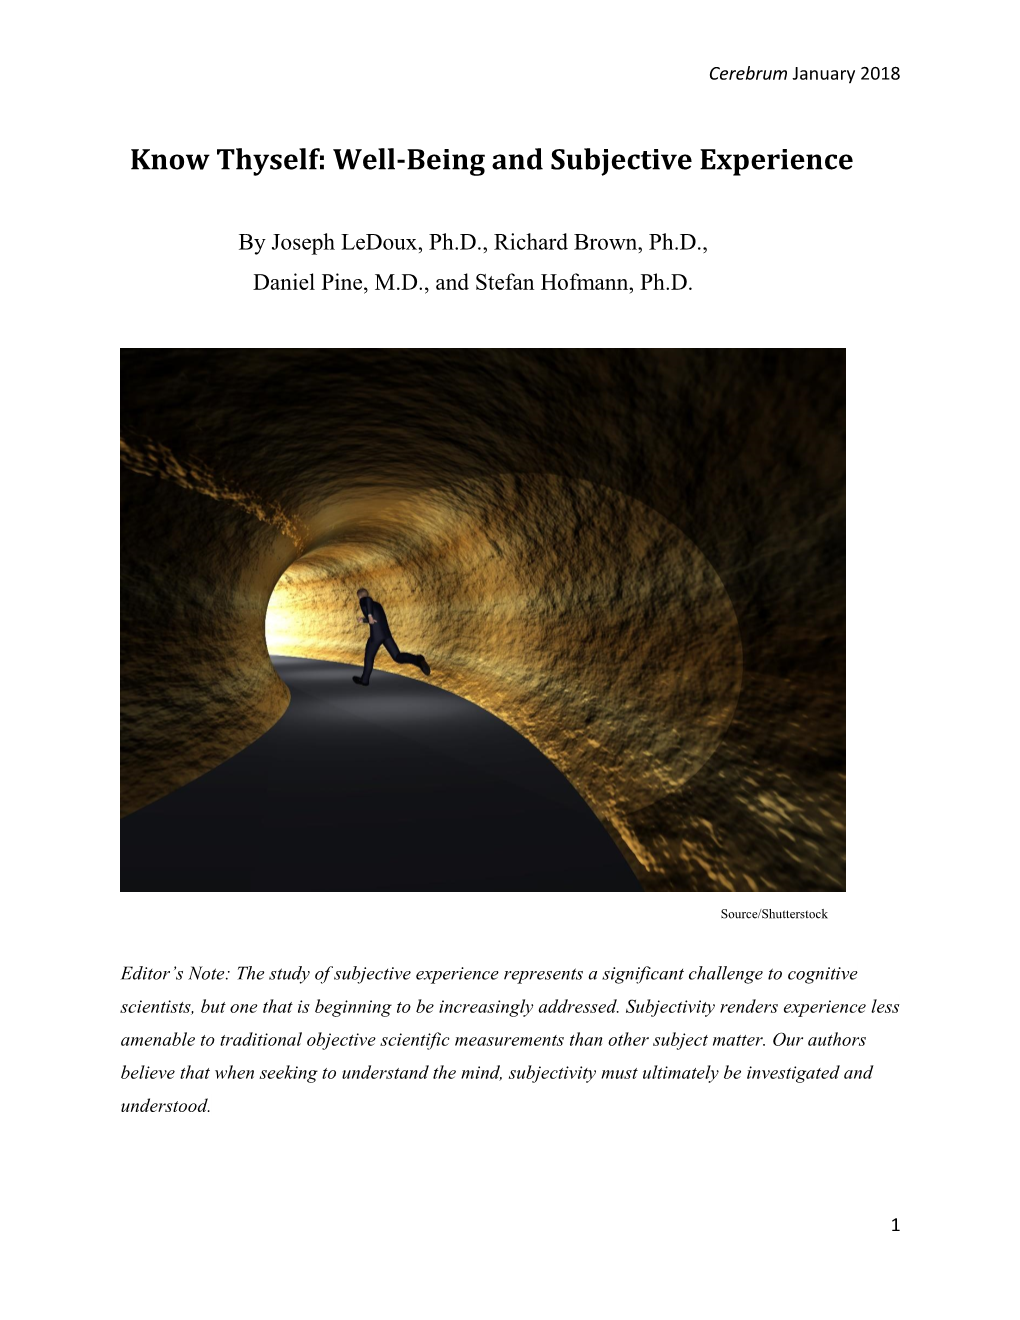 Know Thyself: Well-Being and Subjective Experience